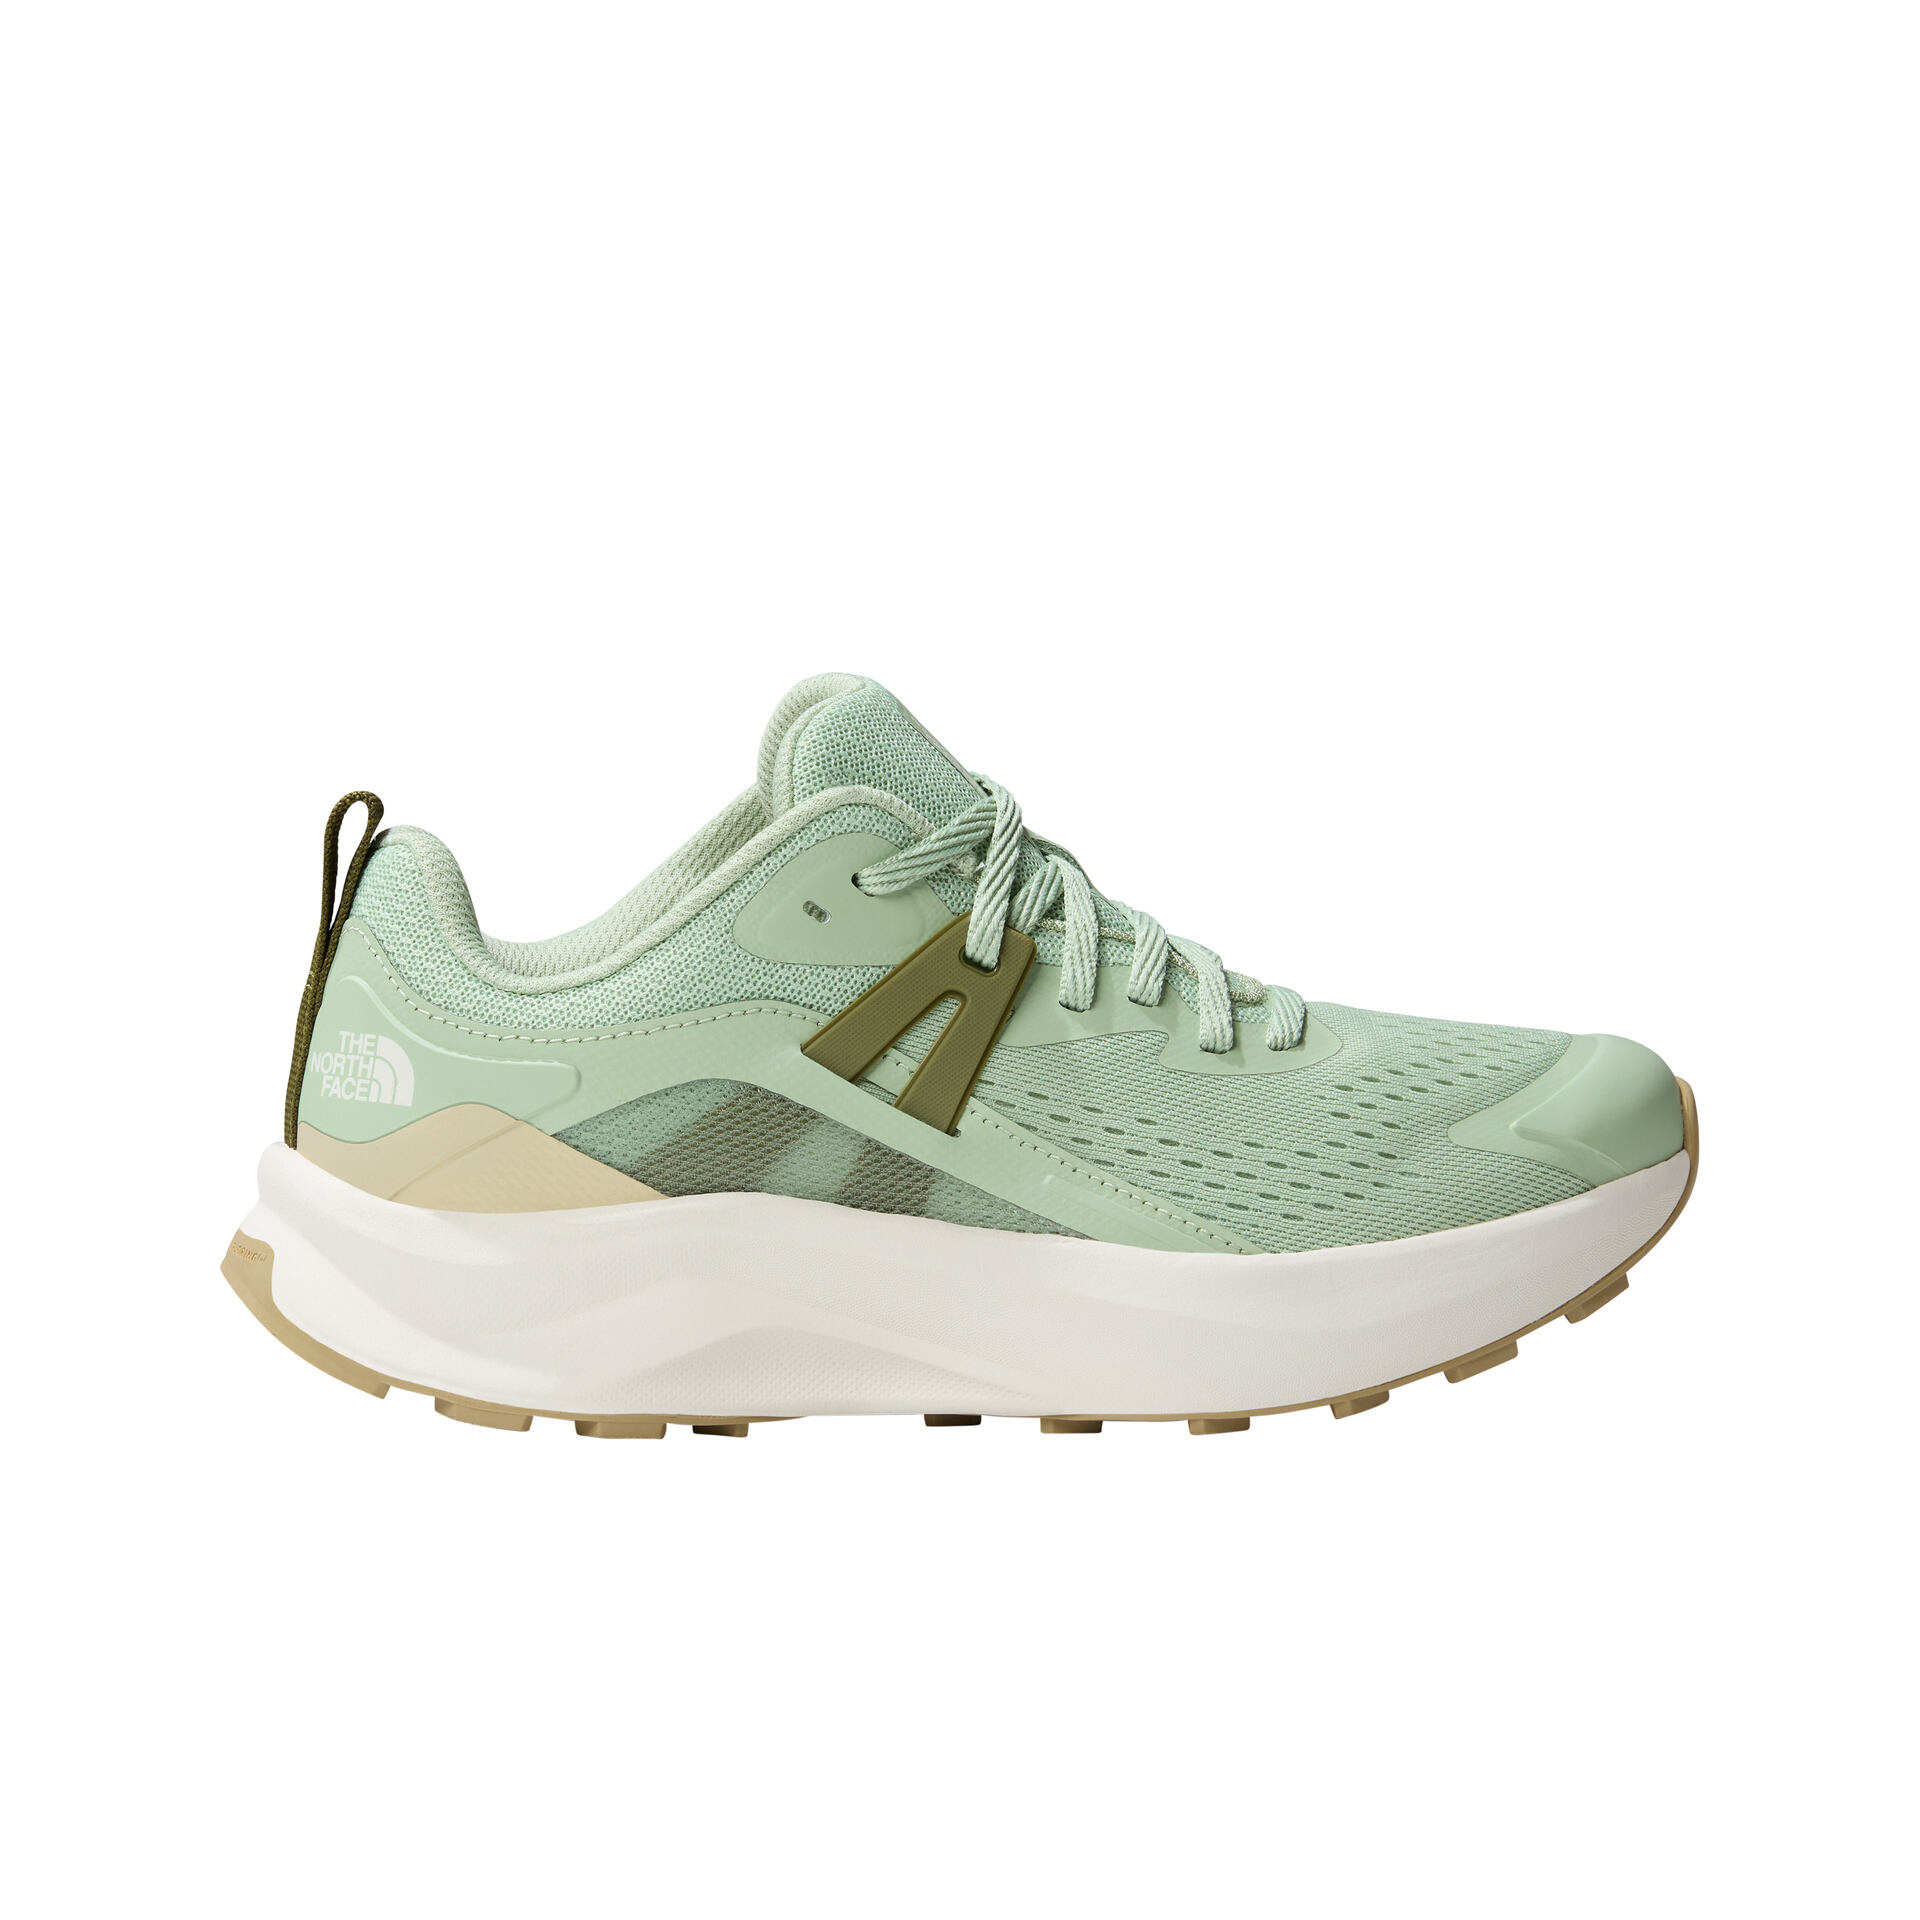 The North Face Zapatillas Mujer W HYPNUM lateral exterior